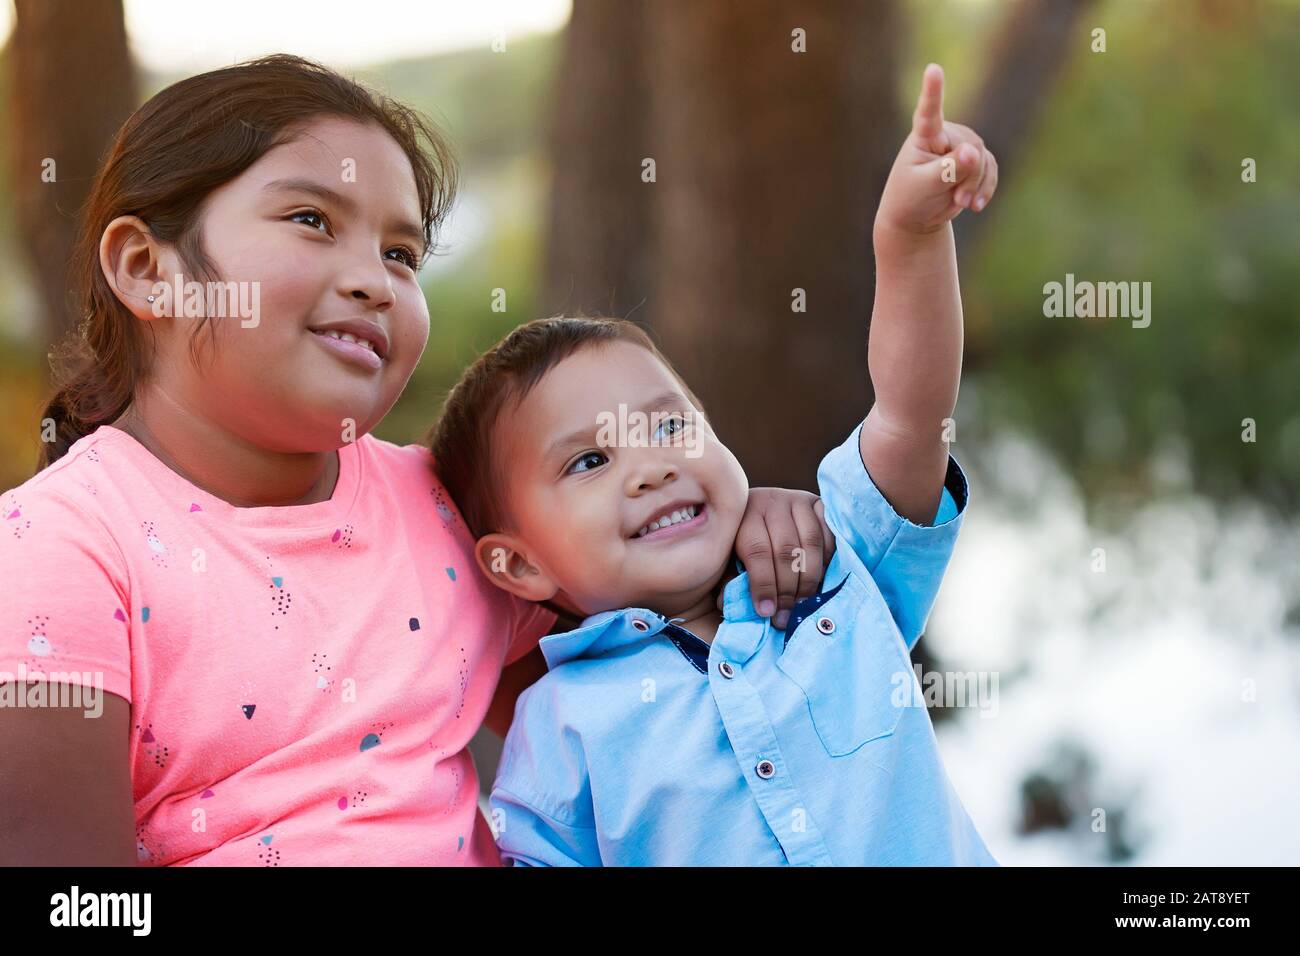 A happy younger brother looks and points to the sky while his older sister puts her arm around his neck and smiles. Stock Photo